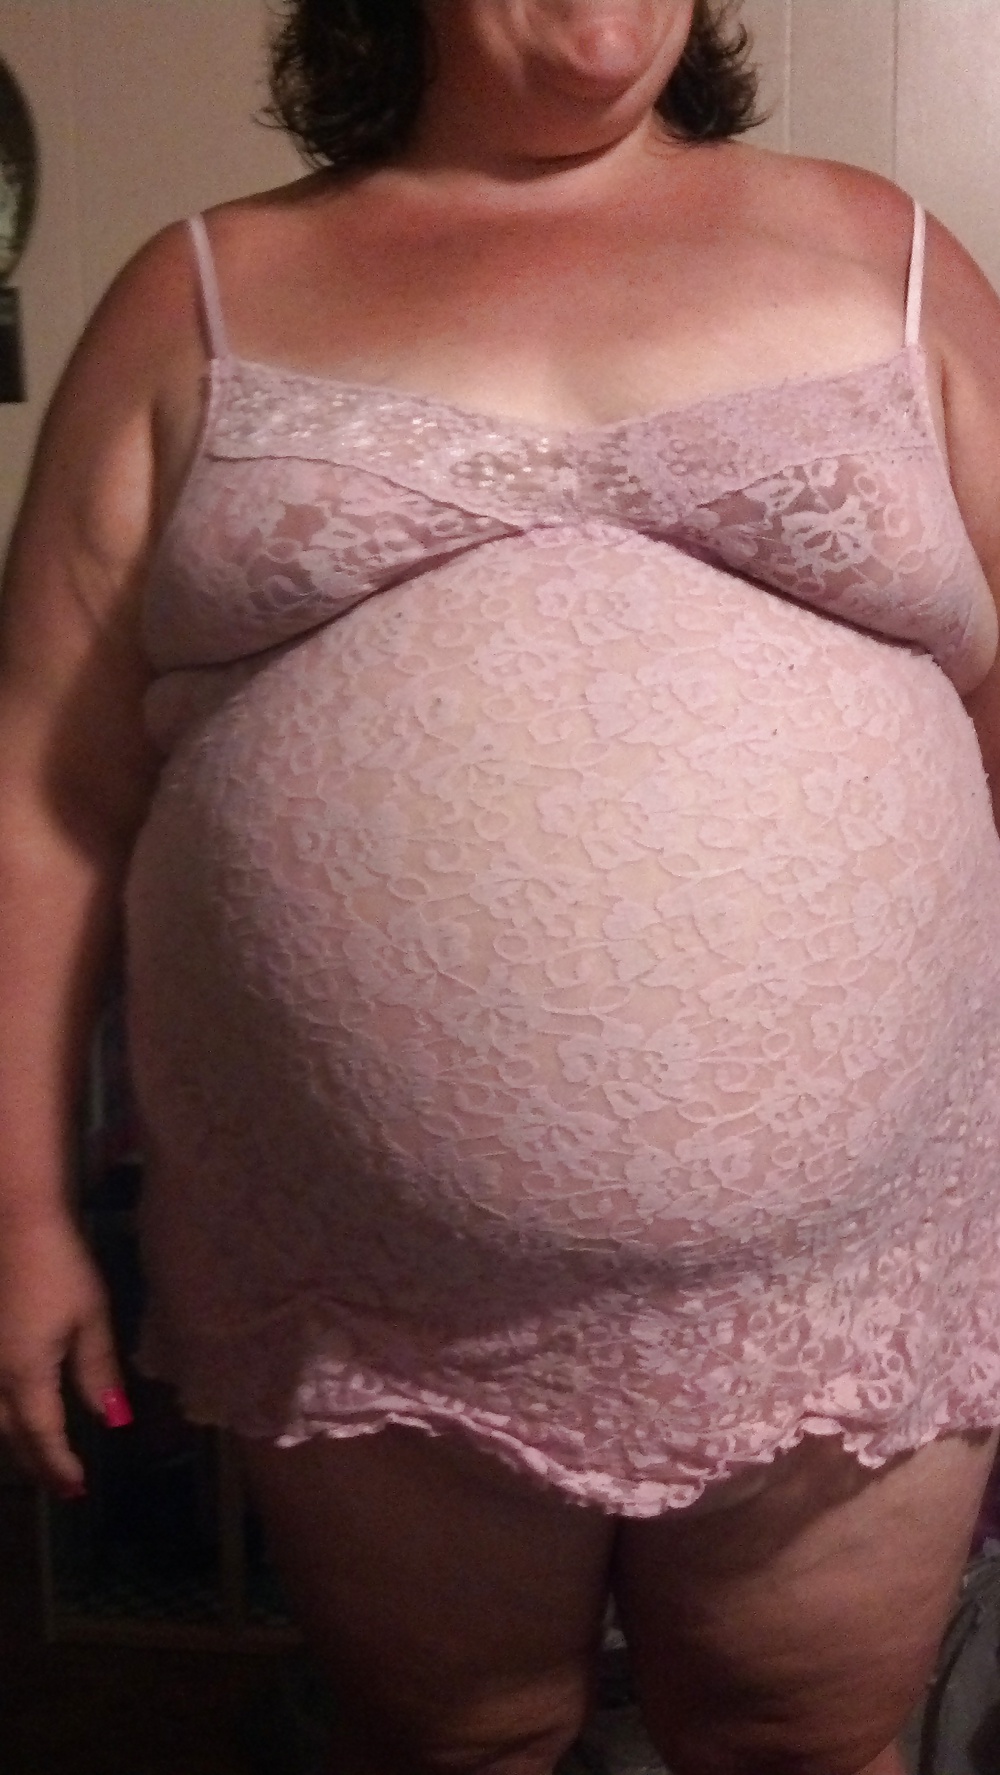 Some new Pictures of the Pregnant Wife  #28264693